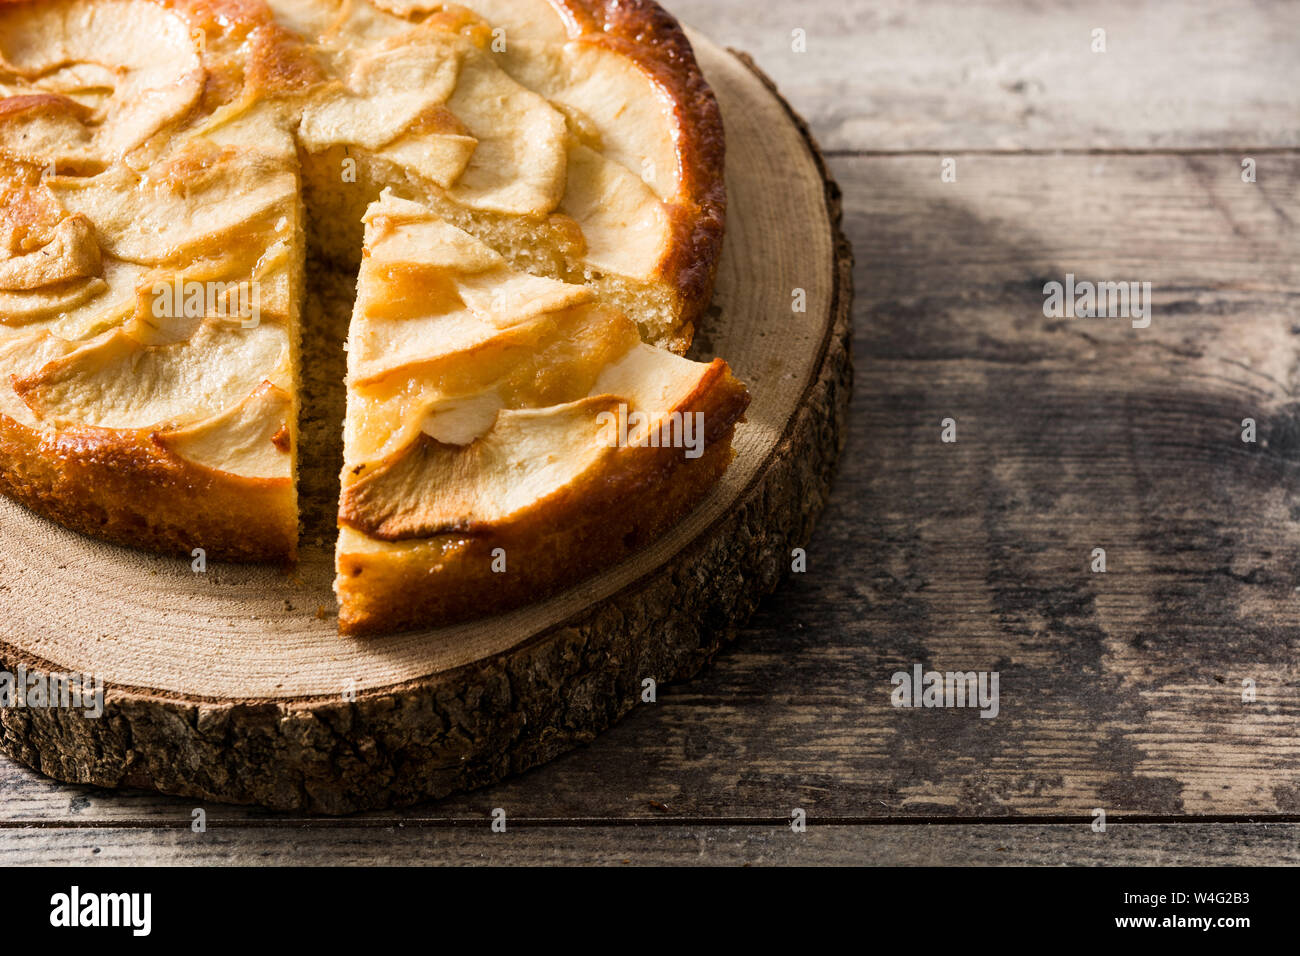 Homemade apple pie on wooden table. Copy space Stock Photo